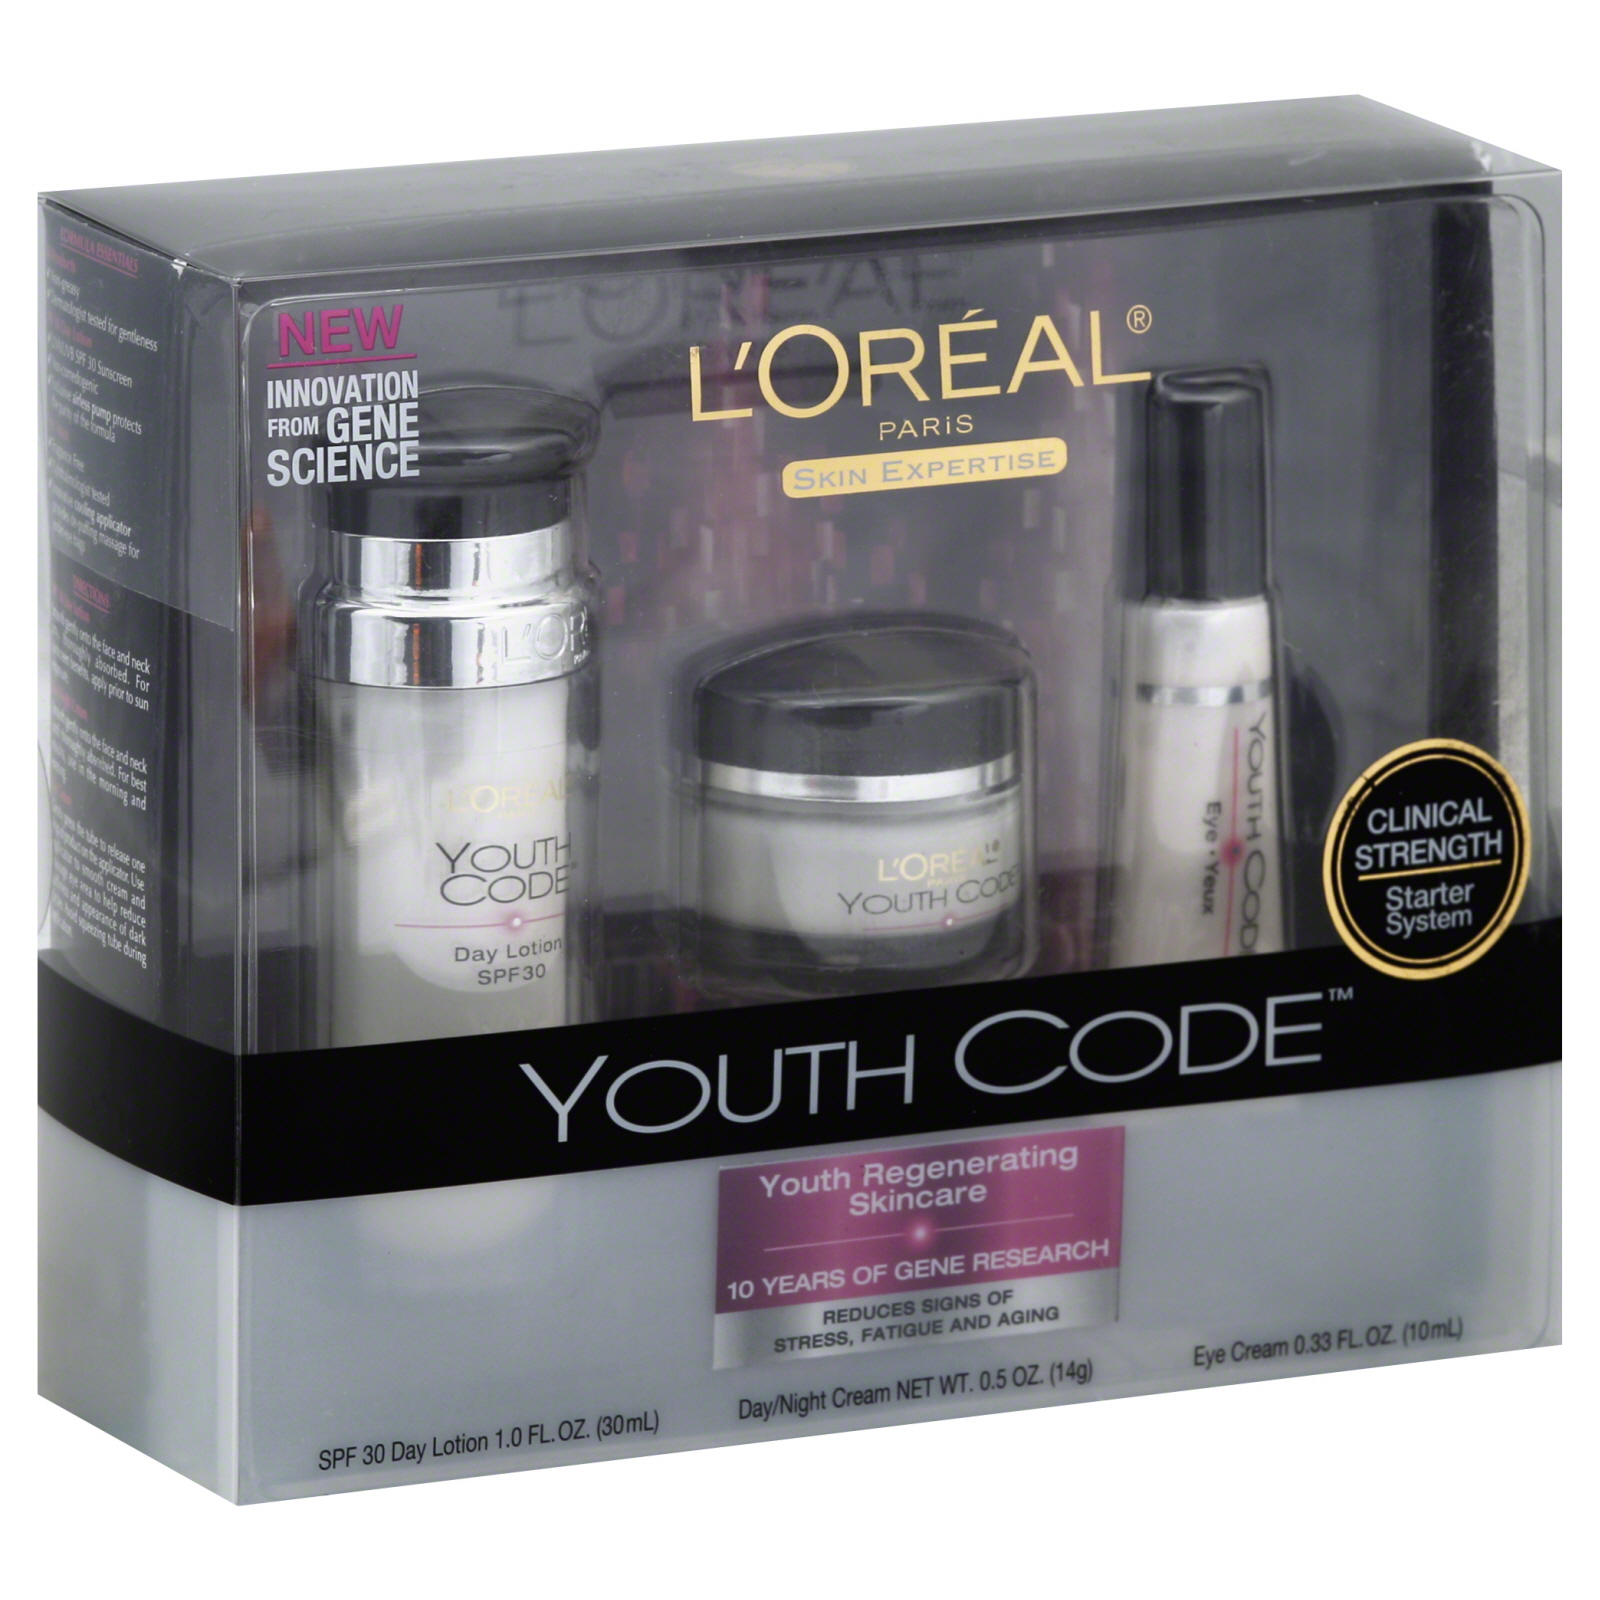 L'Oreal Skin Expertise Youth Code Starter System, Youth Regenerating Skincare, 1 system